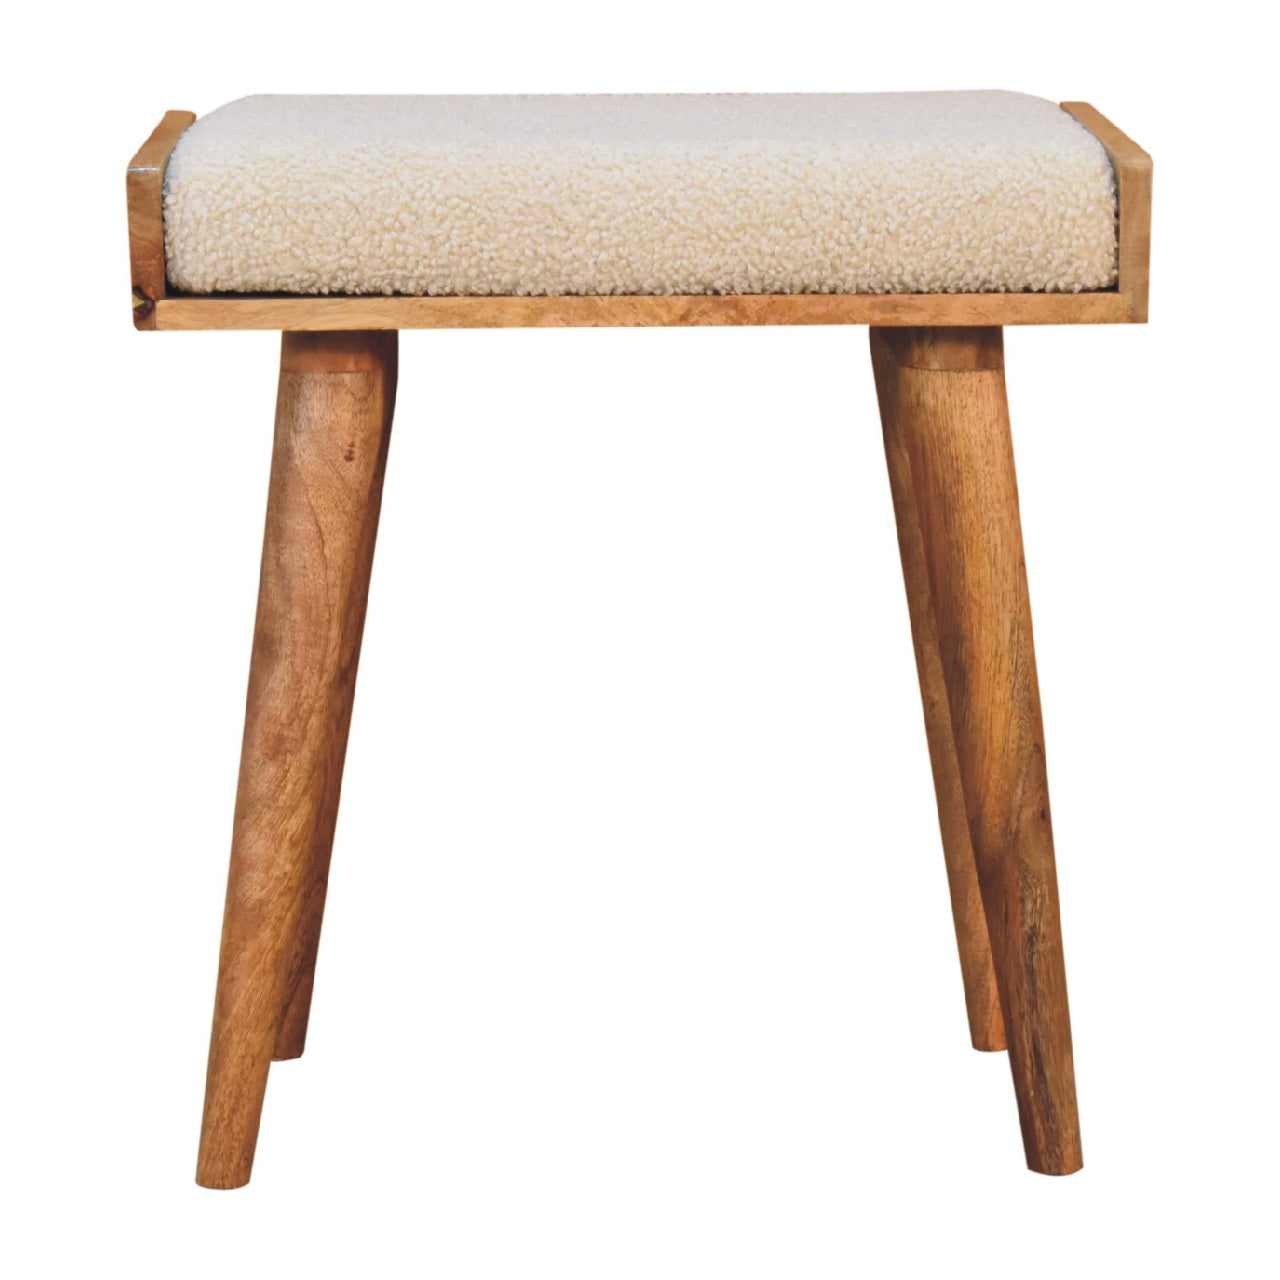 View Boucle Cream Tray Style Footstool information